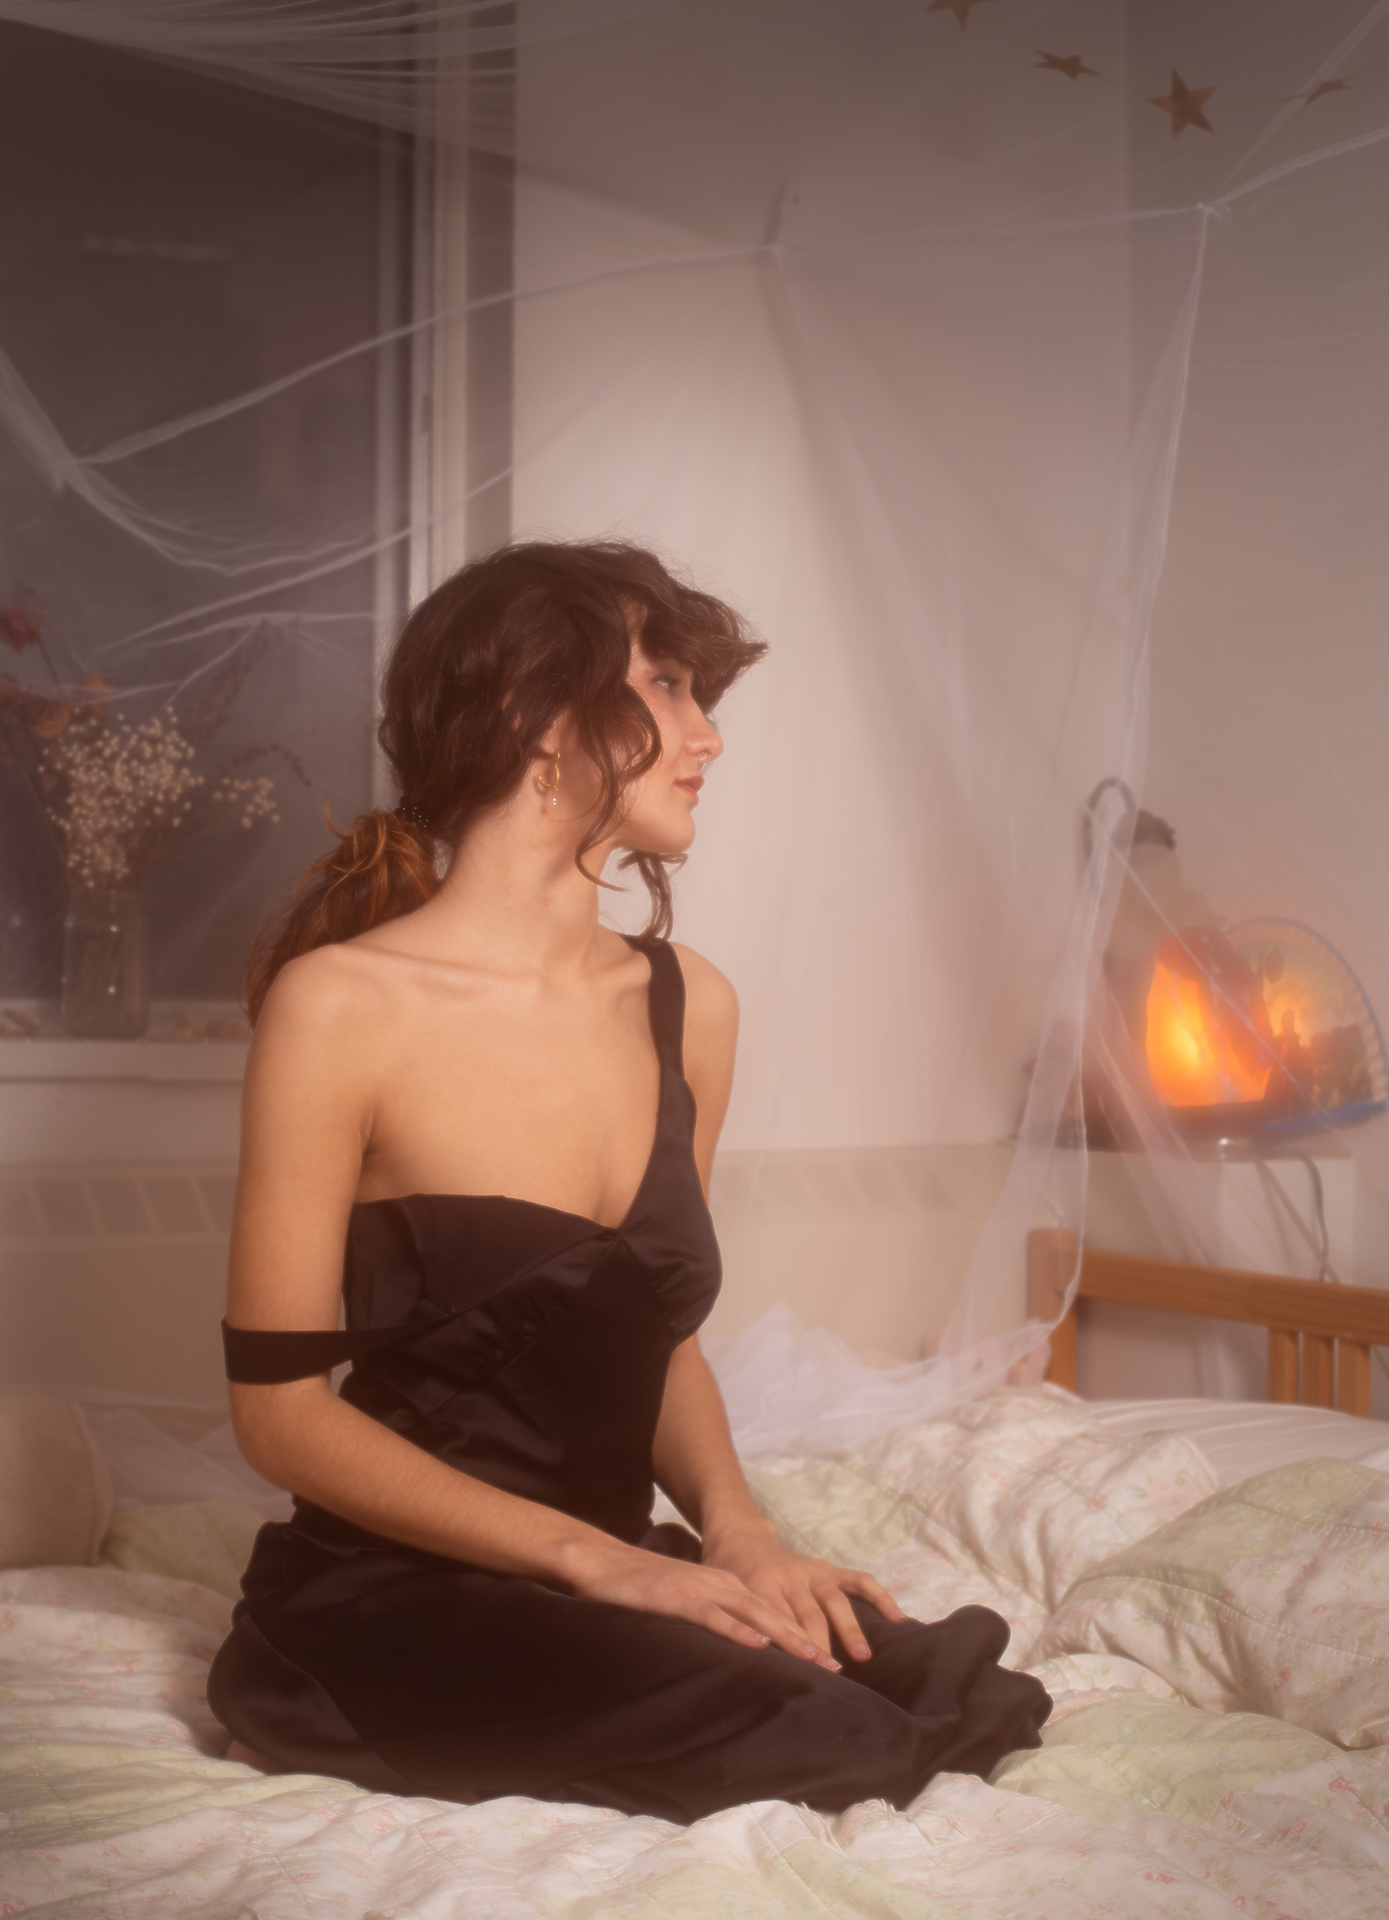 Lola kneeling on their bed. Their head is turned to the side, away from the camera showing their profile. They are wearing an elegant black silk dress with thick straps, one strap has fallen off their shoulder. In the background of the image there are some dried flowers in a vase on their windowsill behind them, and a salt lamp is sitting behind their headboard to the right. Their hands are placed elegrantly on their lap.